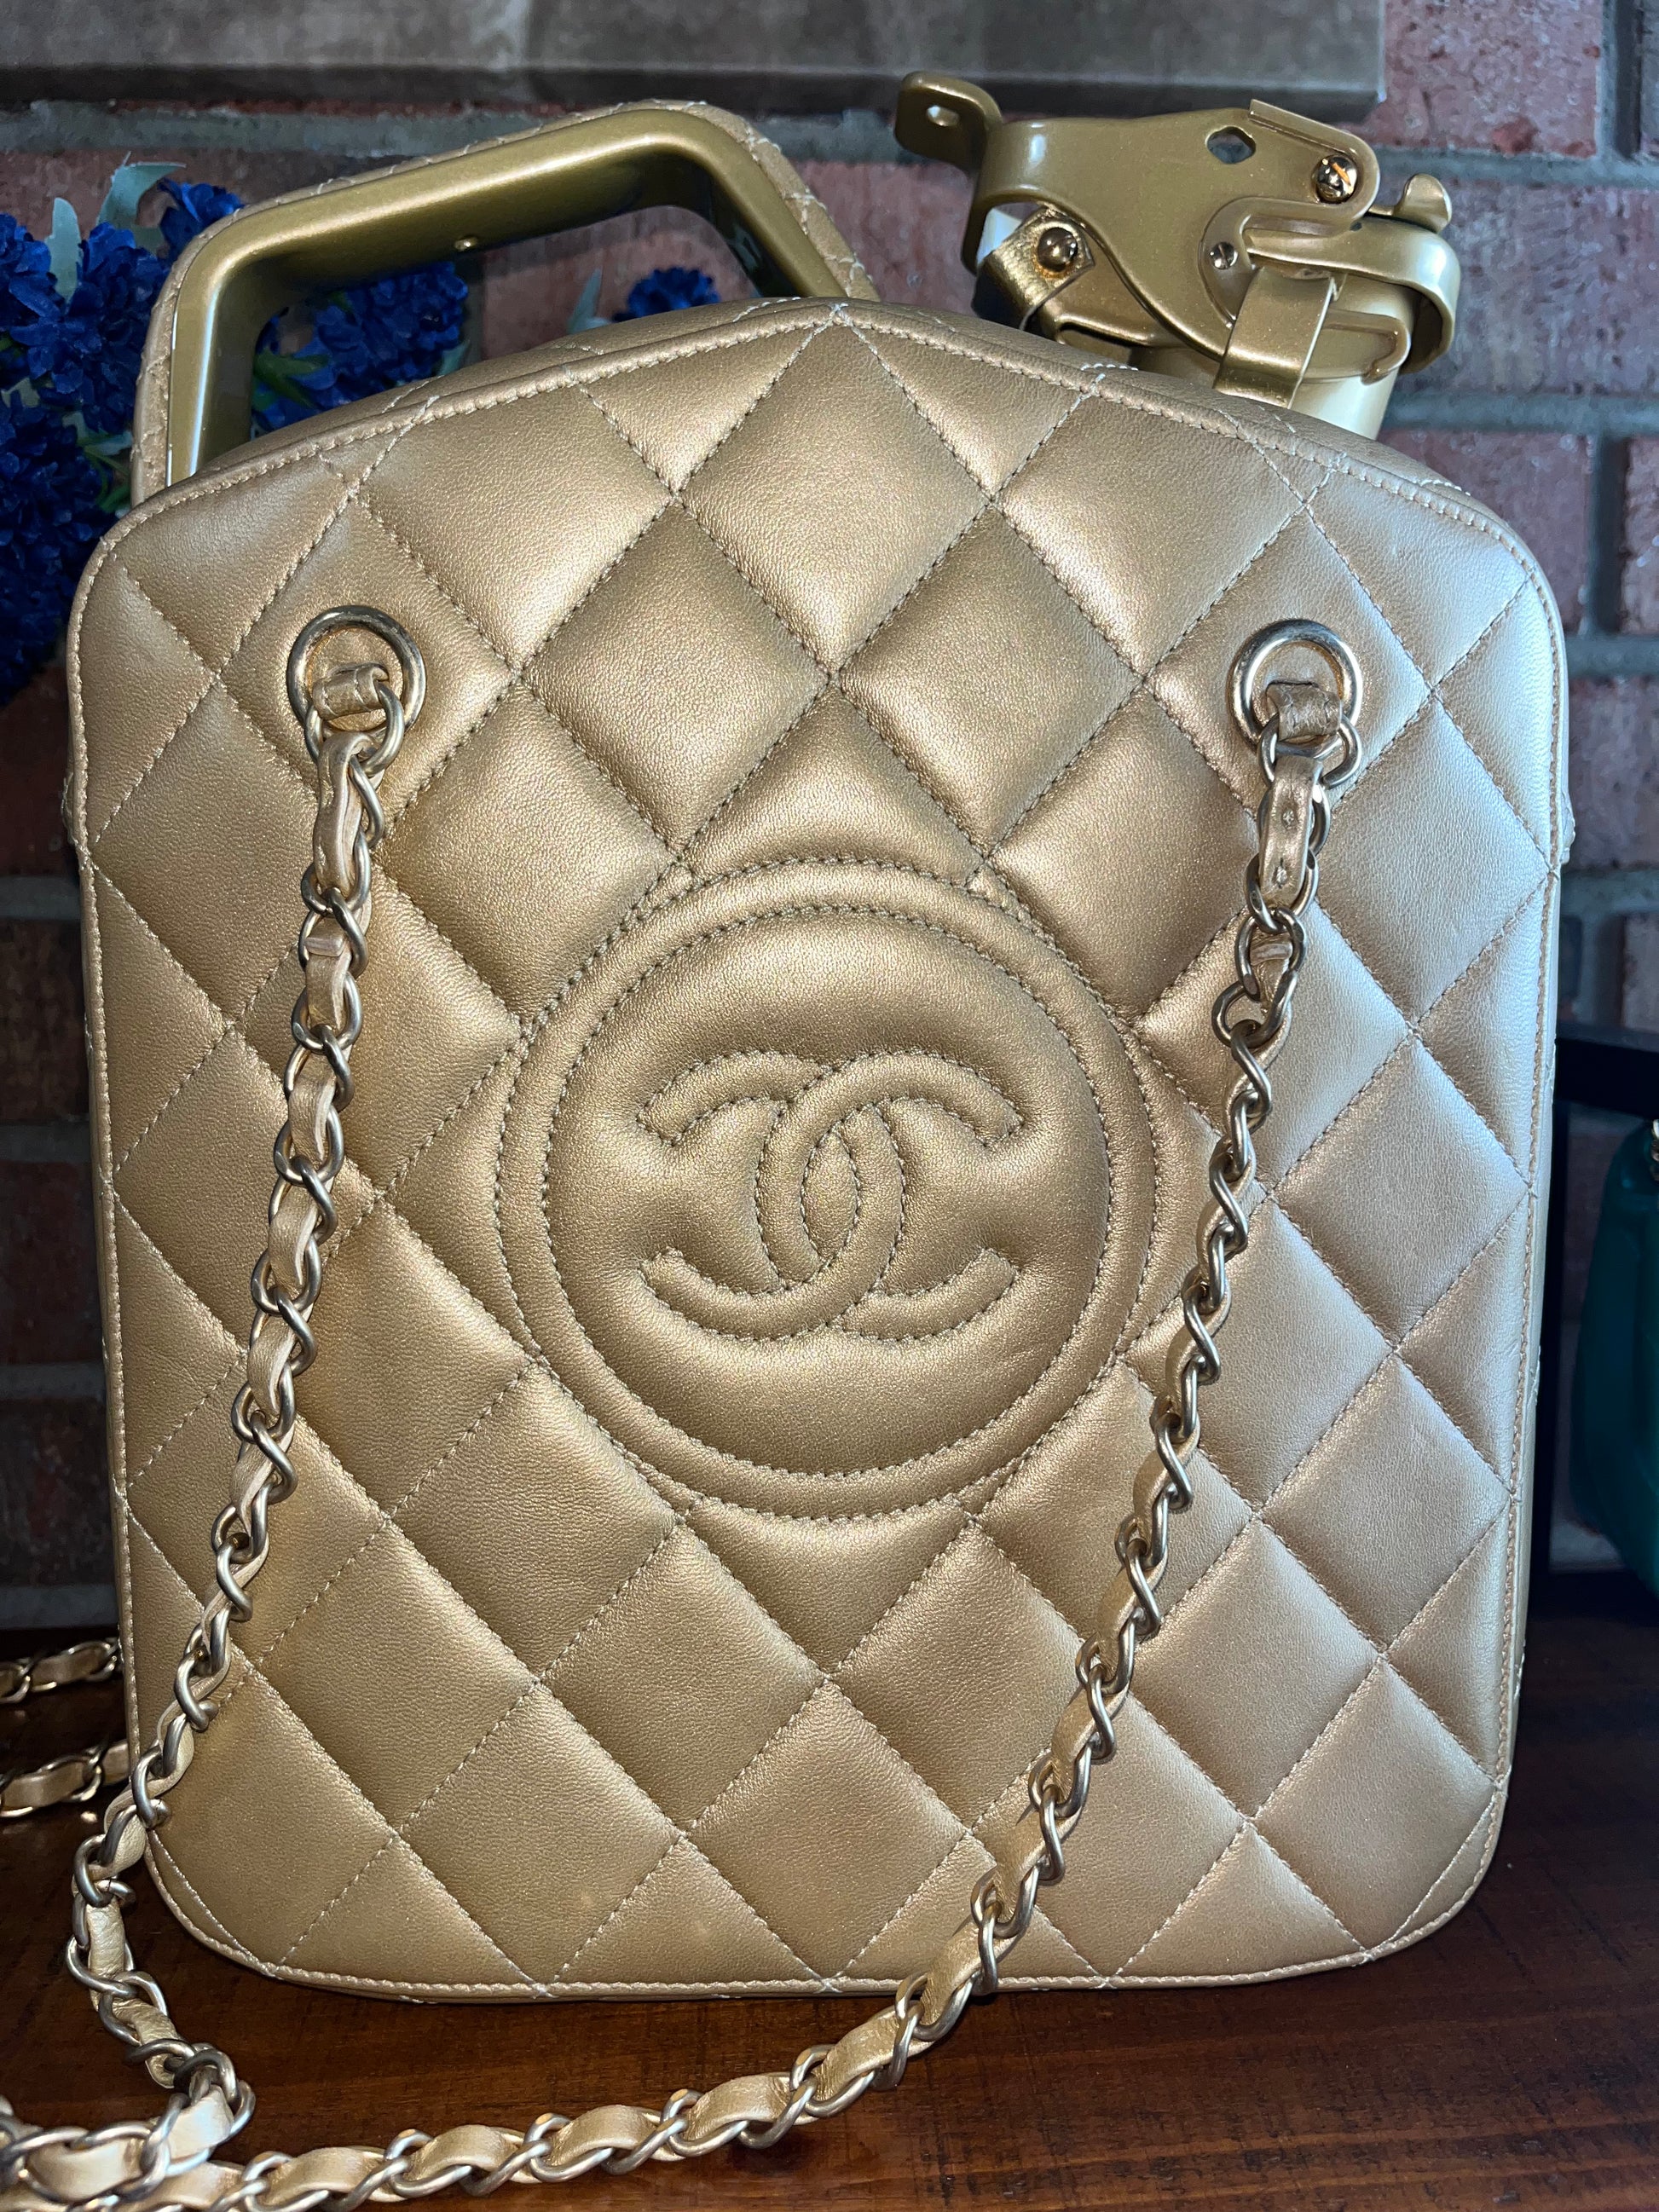 Fast deal full set with Chanel boutique receipt Authentic Chanel